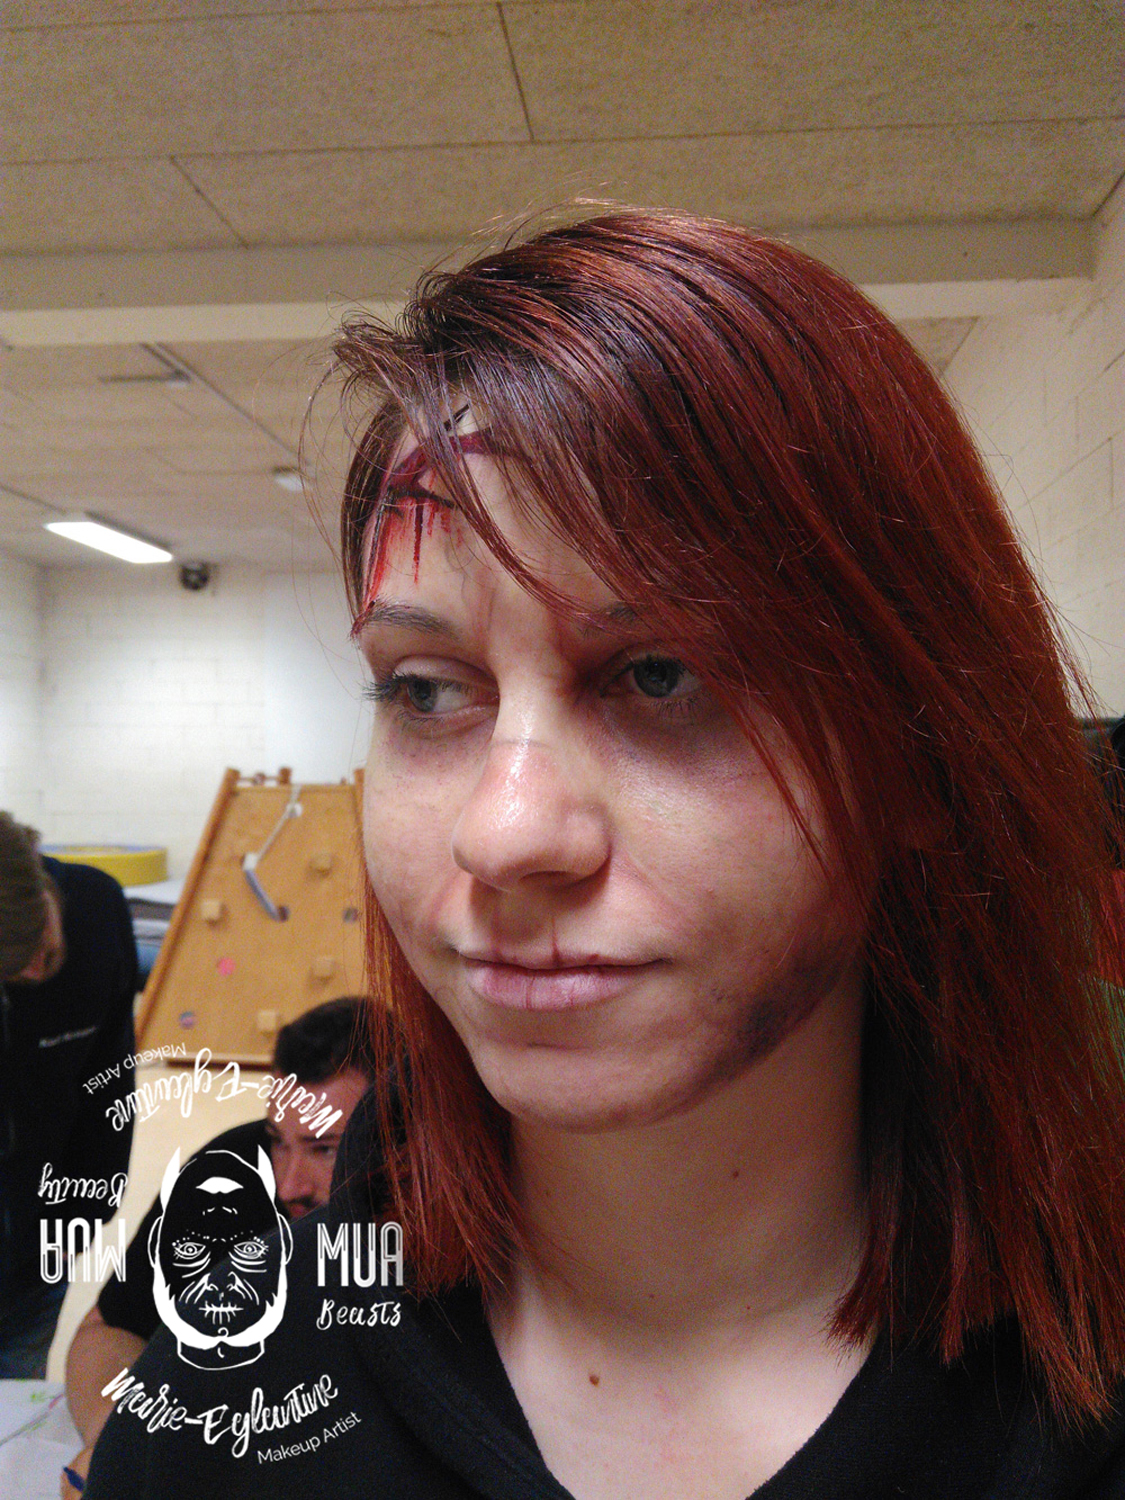 Zombie at the Zombie Night LLN